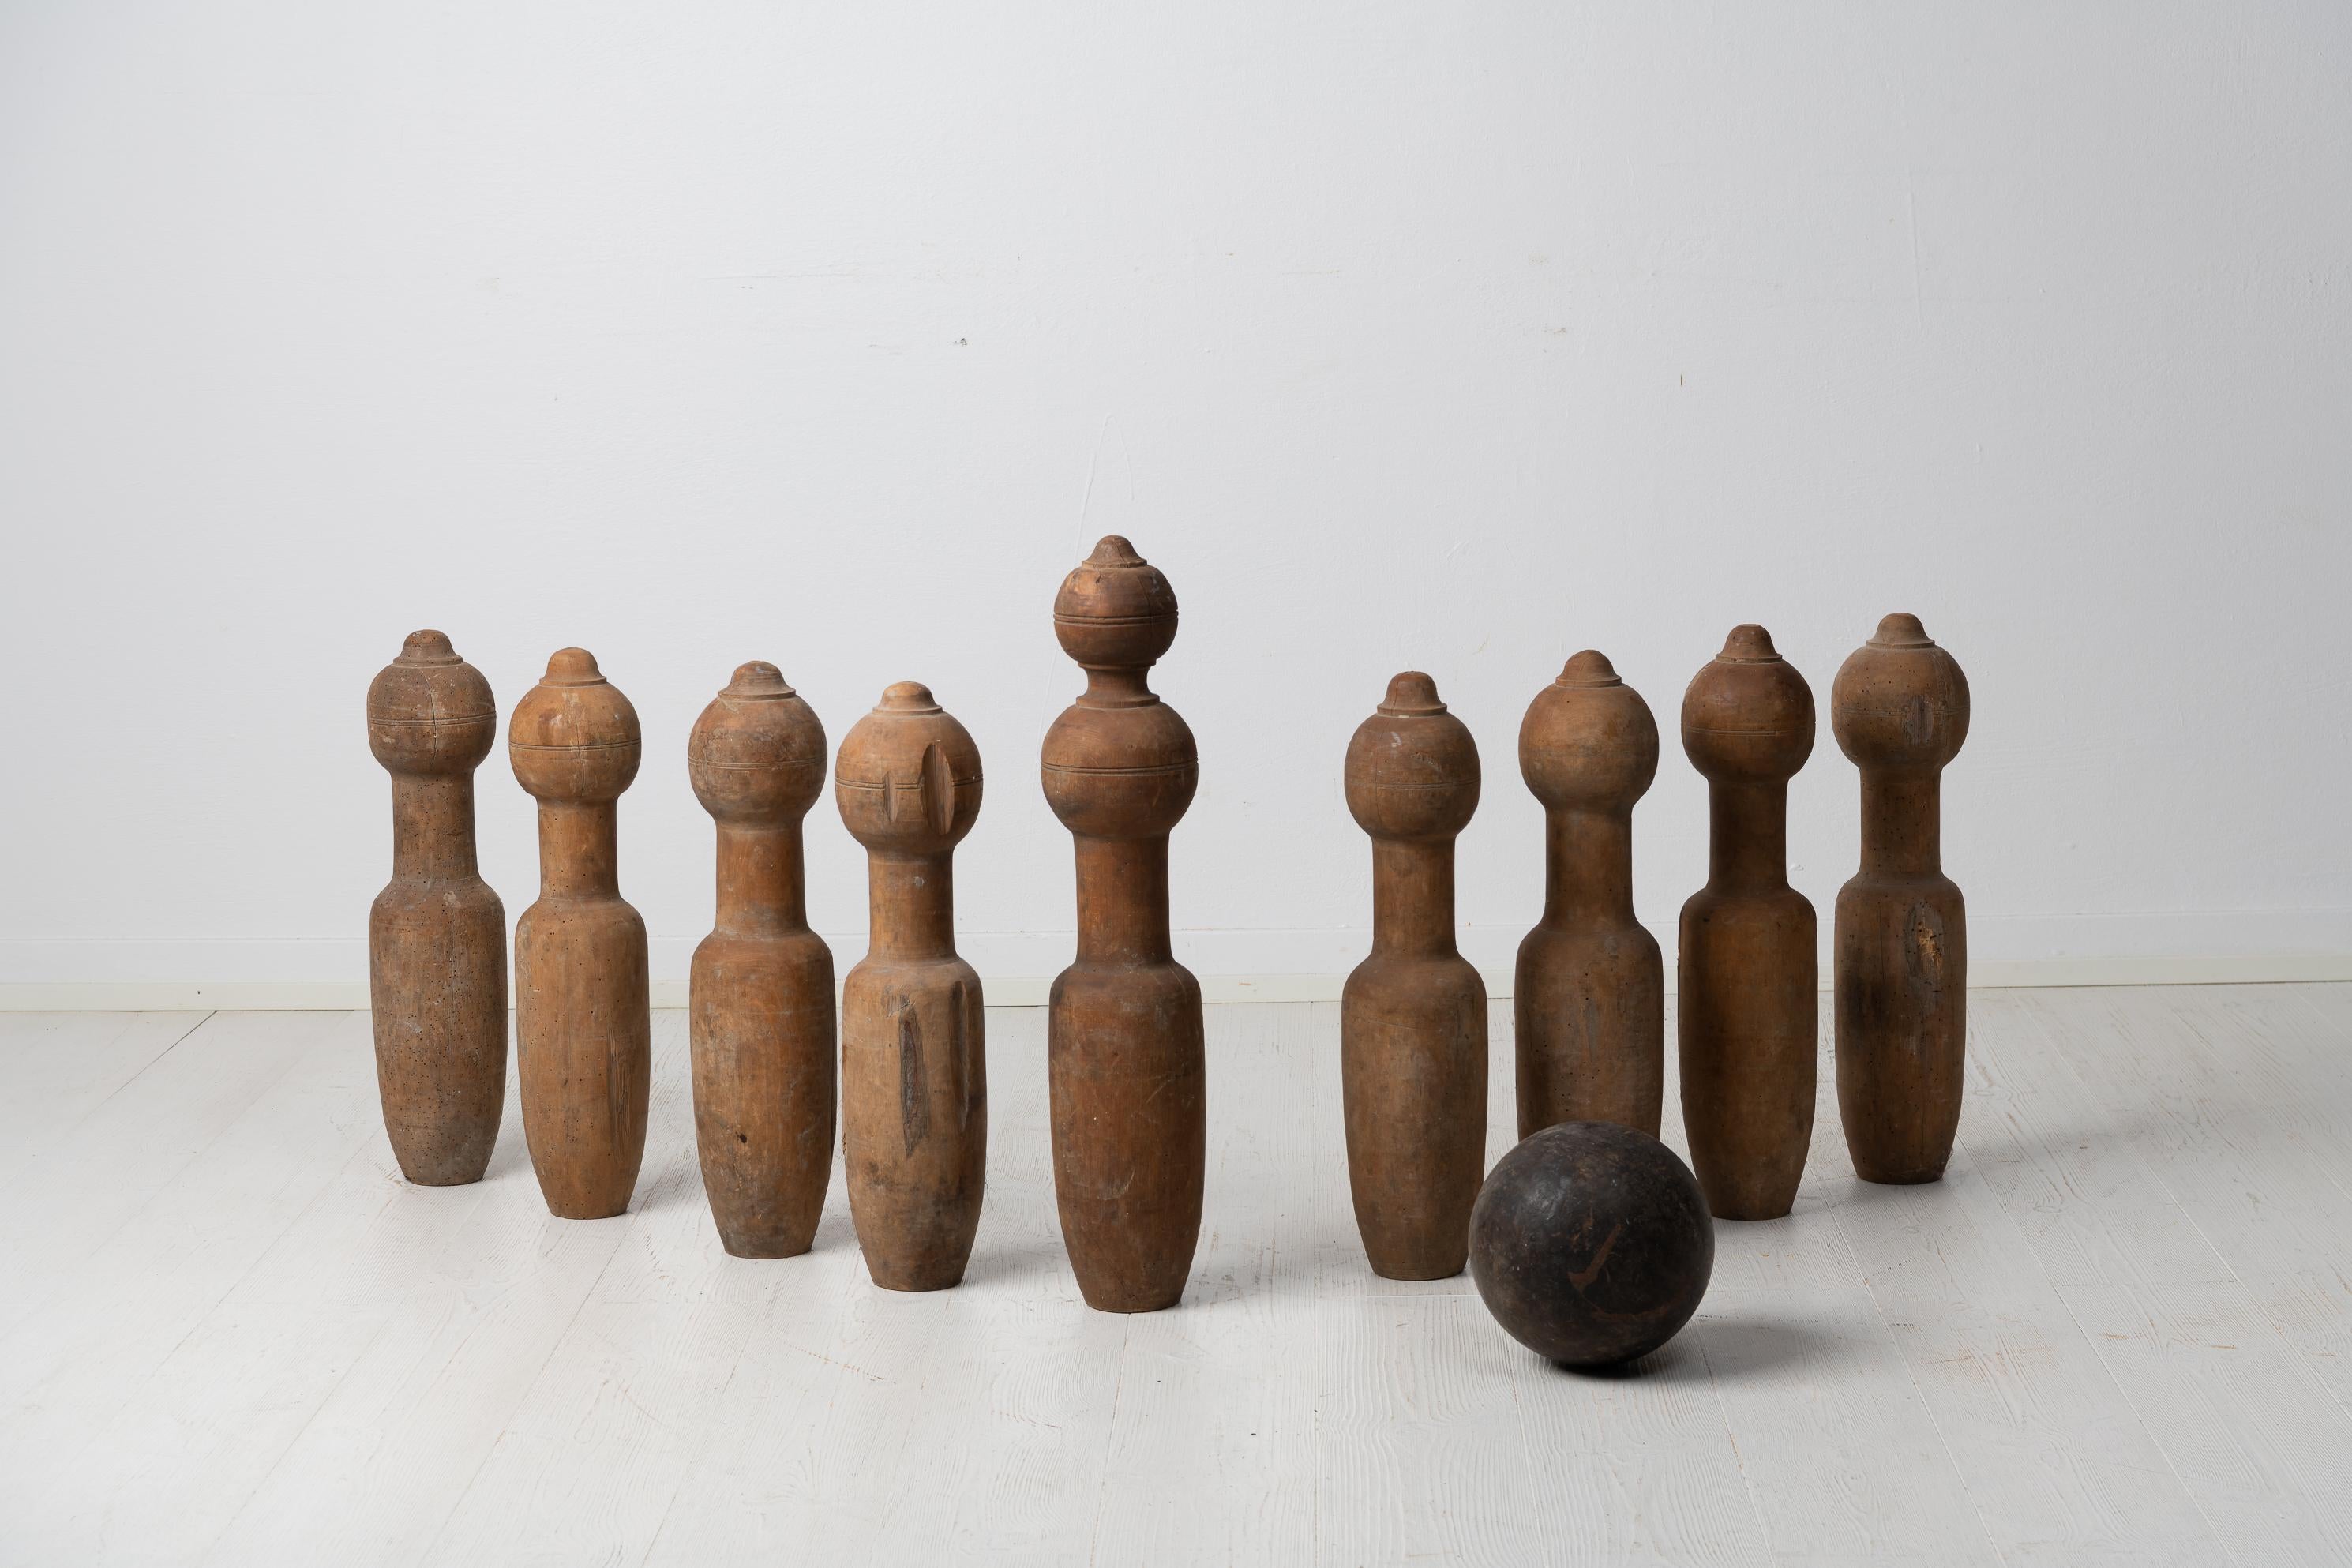 Swedish antique bowling set from the mid 19th century, around 1850. The set, a skittles or ninepins game as it’s also known, has nine pins in pine and one ball. The large pin is called ”the German” and measures 58 cm tall, the other eight are 47 cm